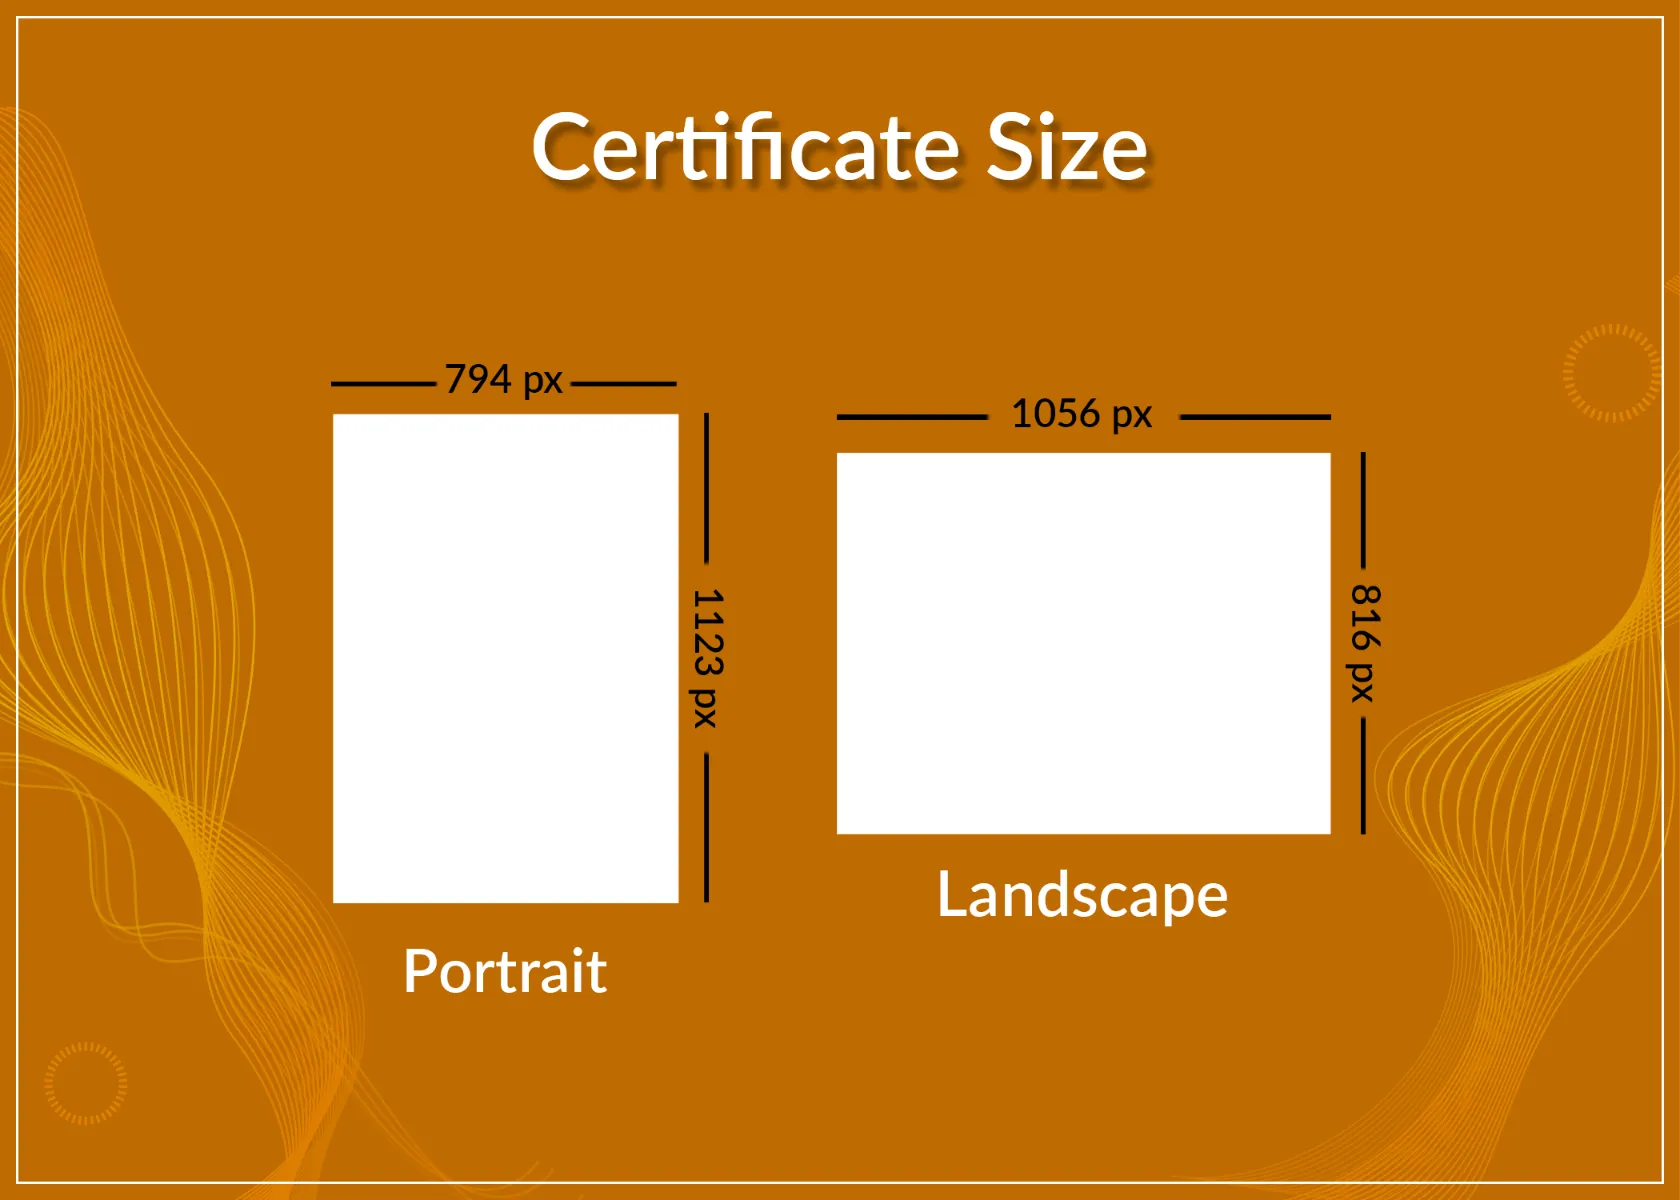 How to Choose the Best Certificate Size